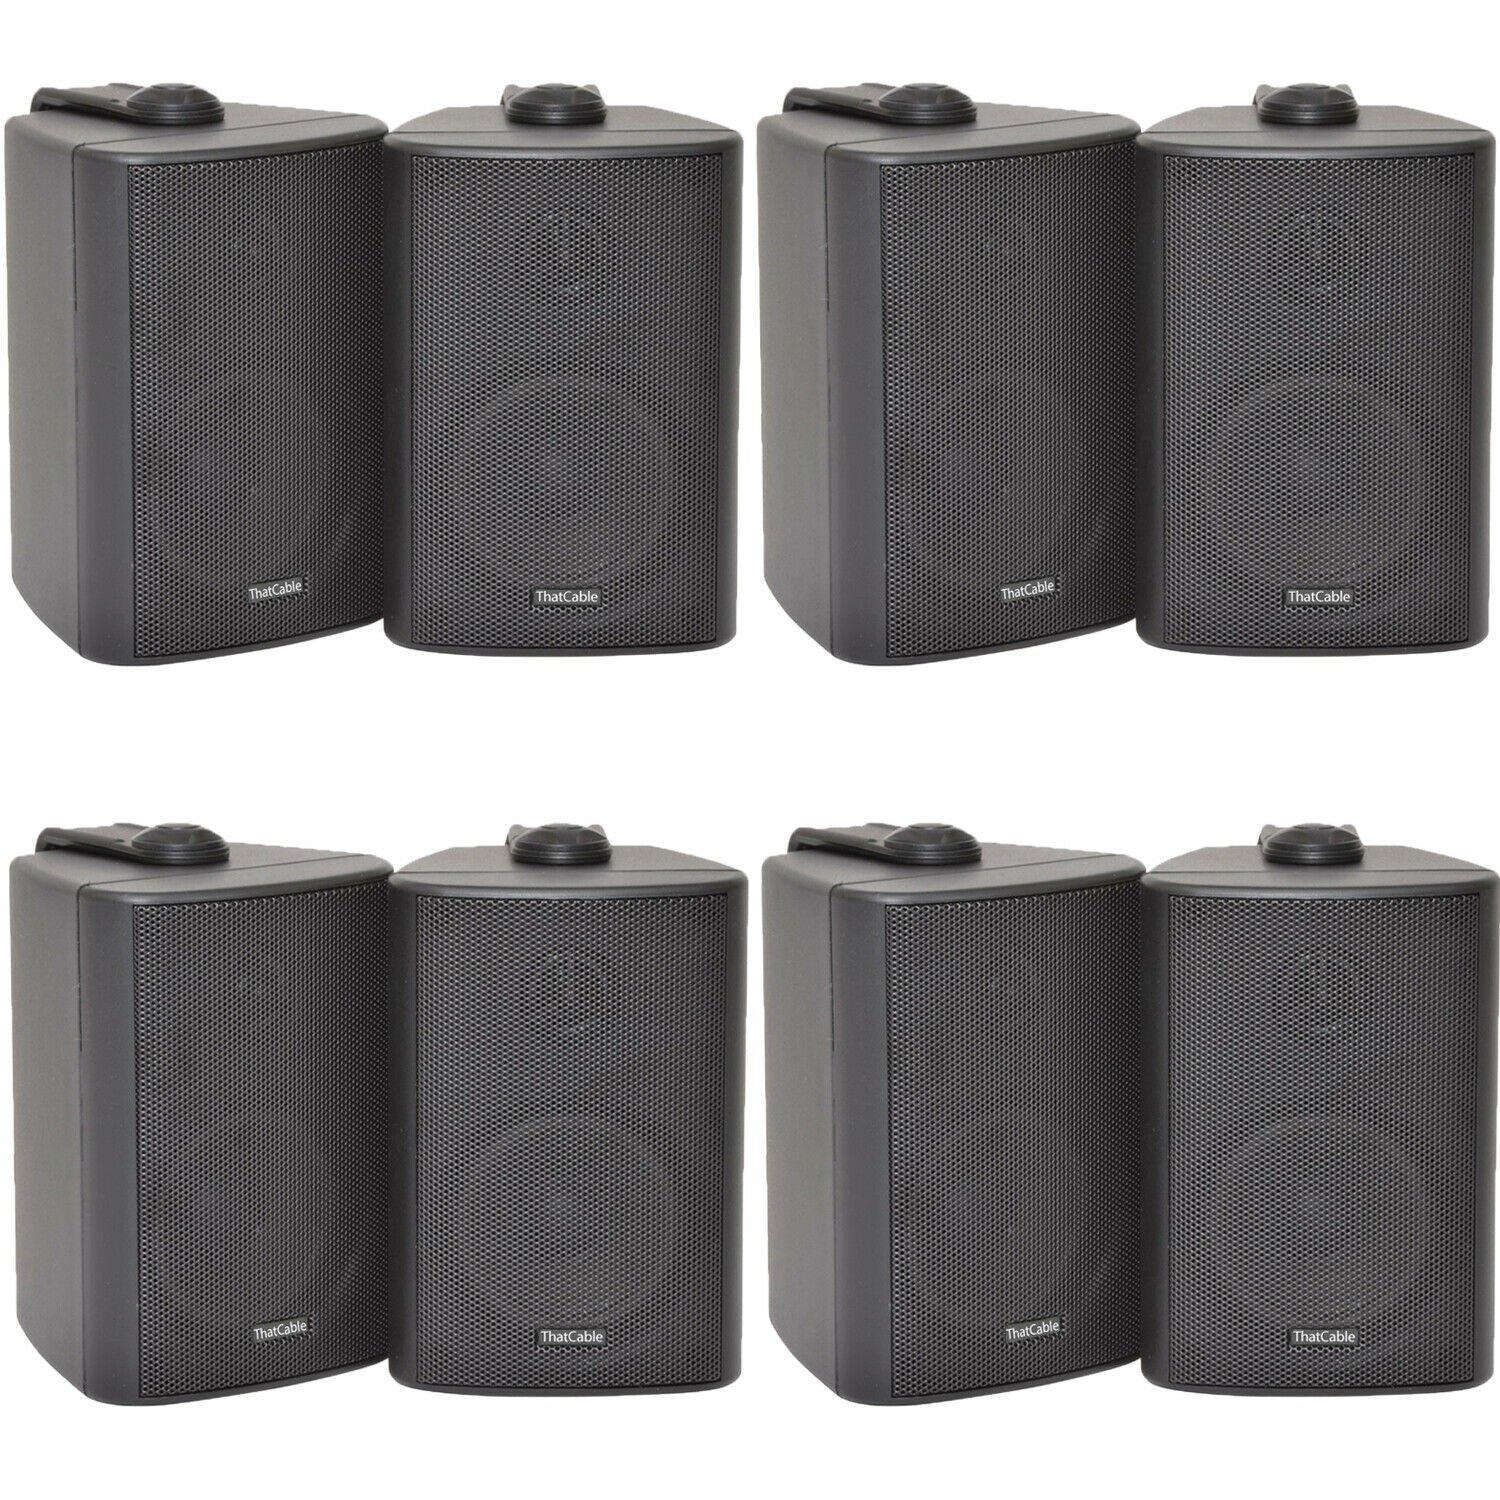 8x 60W 2 Way Black Wall Mounted Stereo Speakers 3